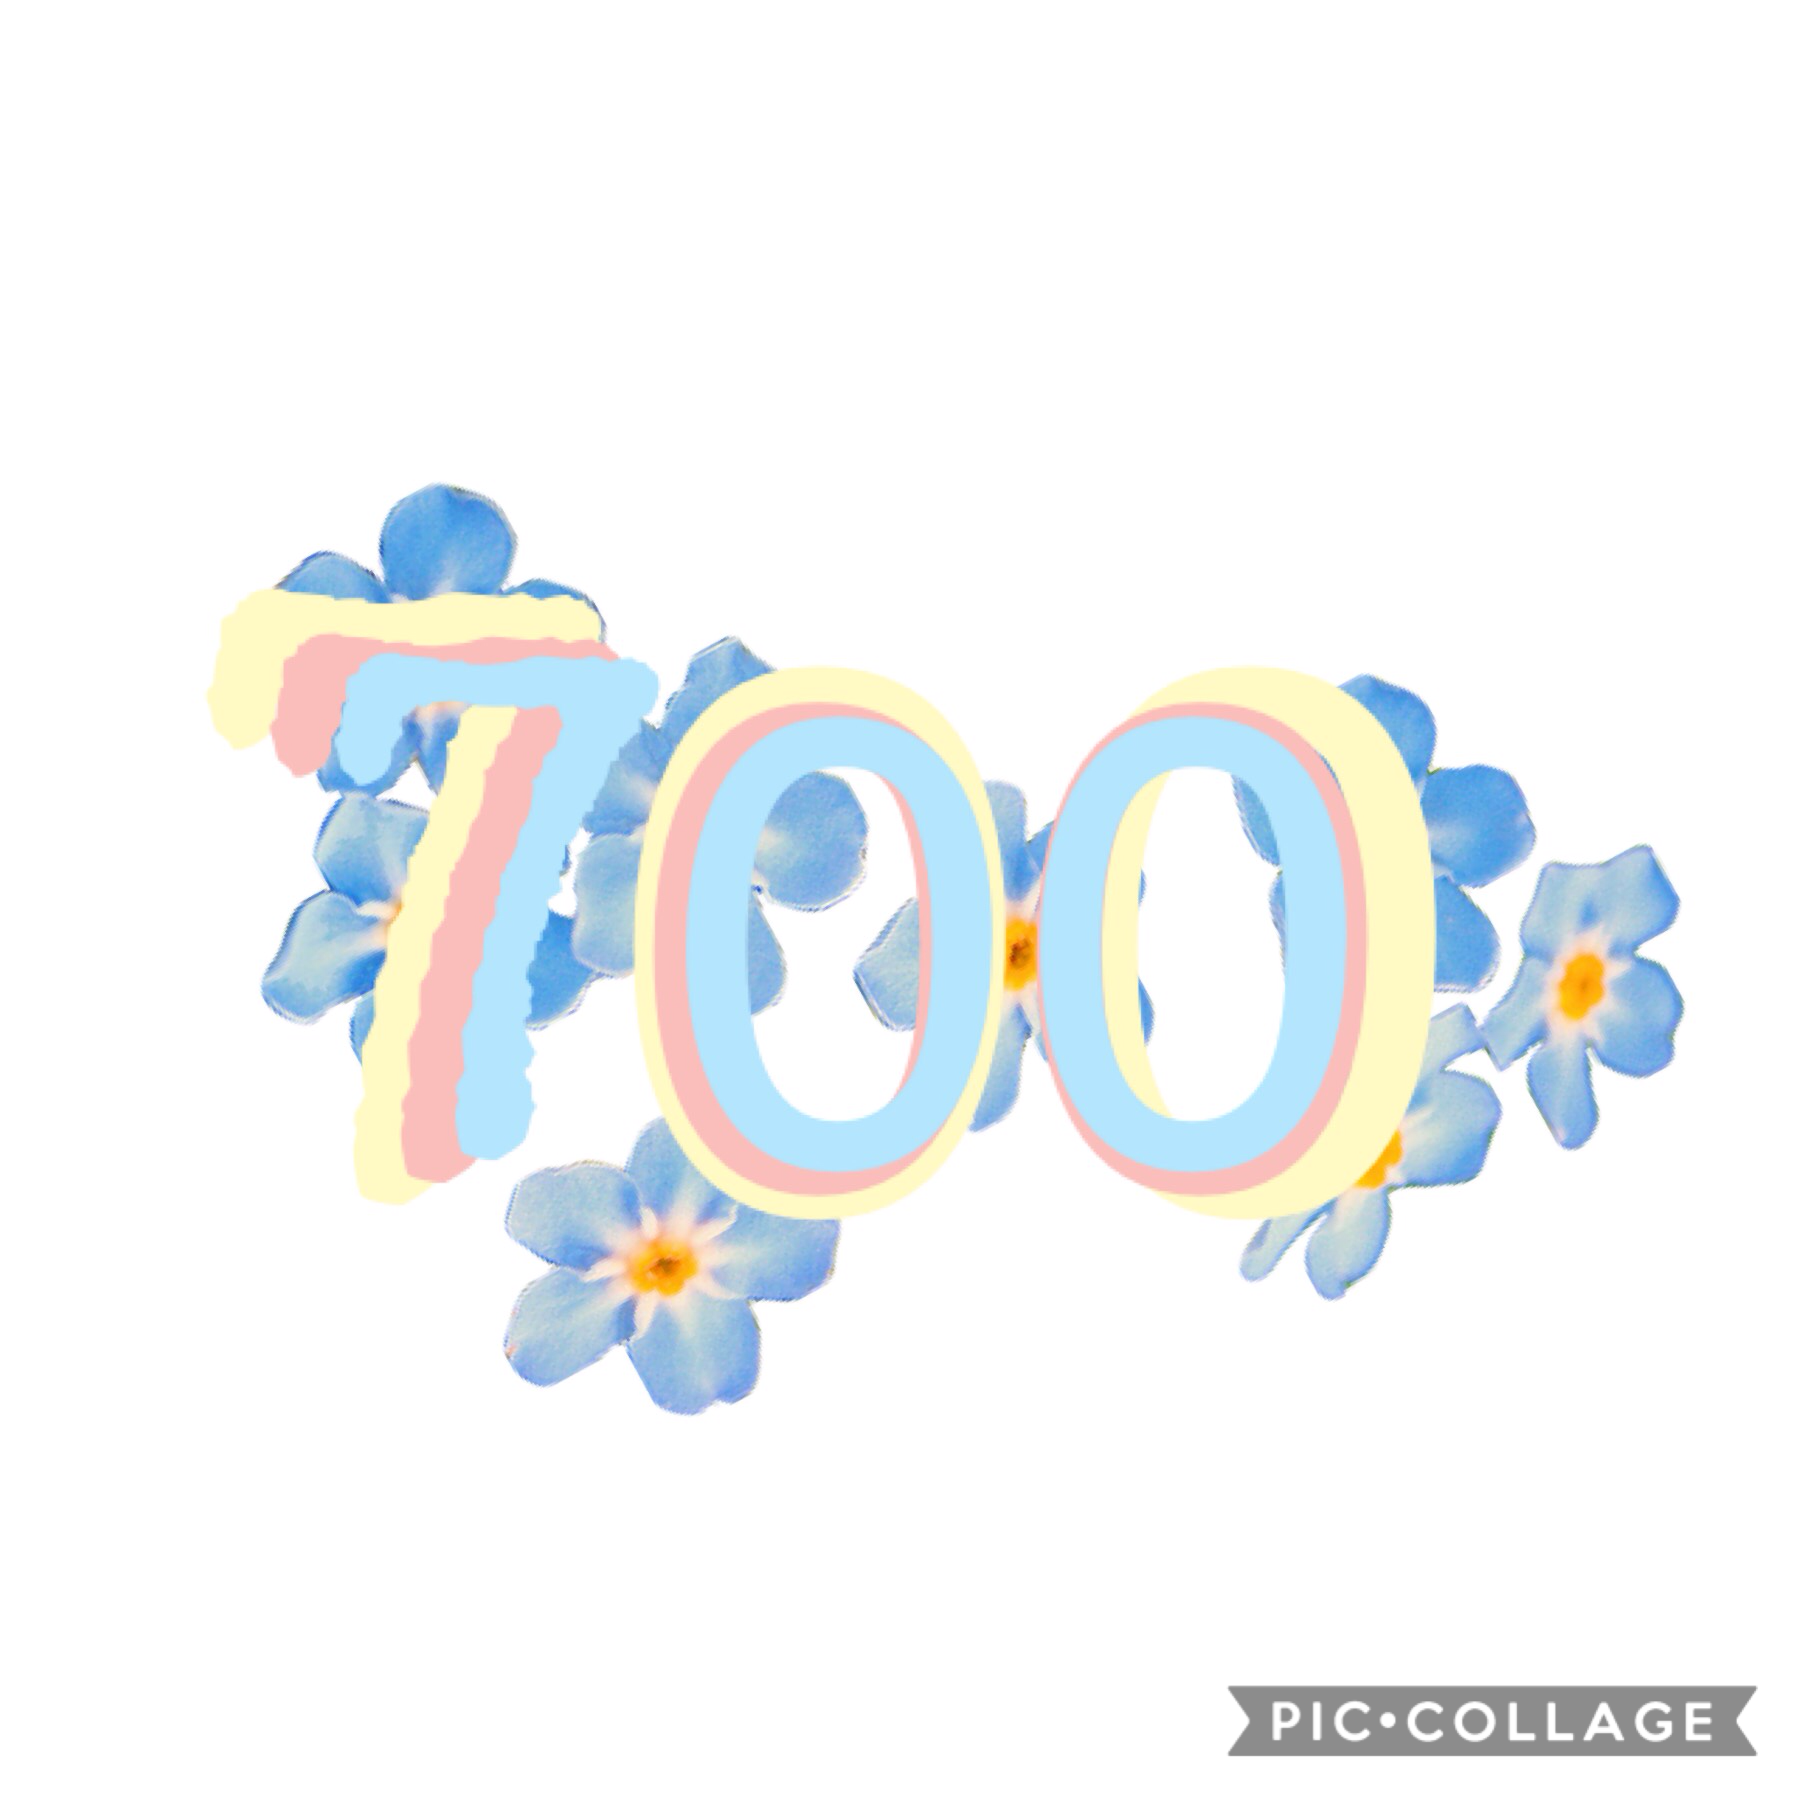 Tap! 

thank you all for 700!! it means so much to me! hoping to get at least 730 or 800 by the end of the year! i will do big events and prizes for 1k. can't wait! 